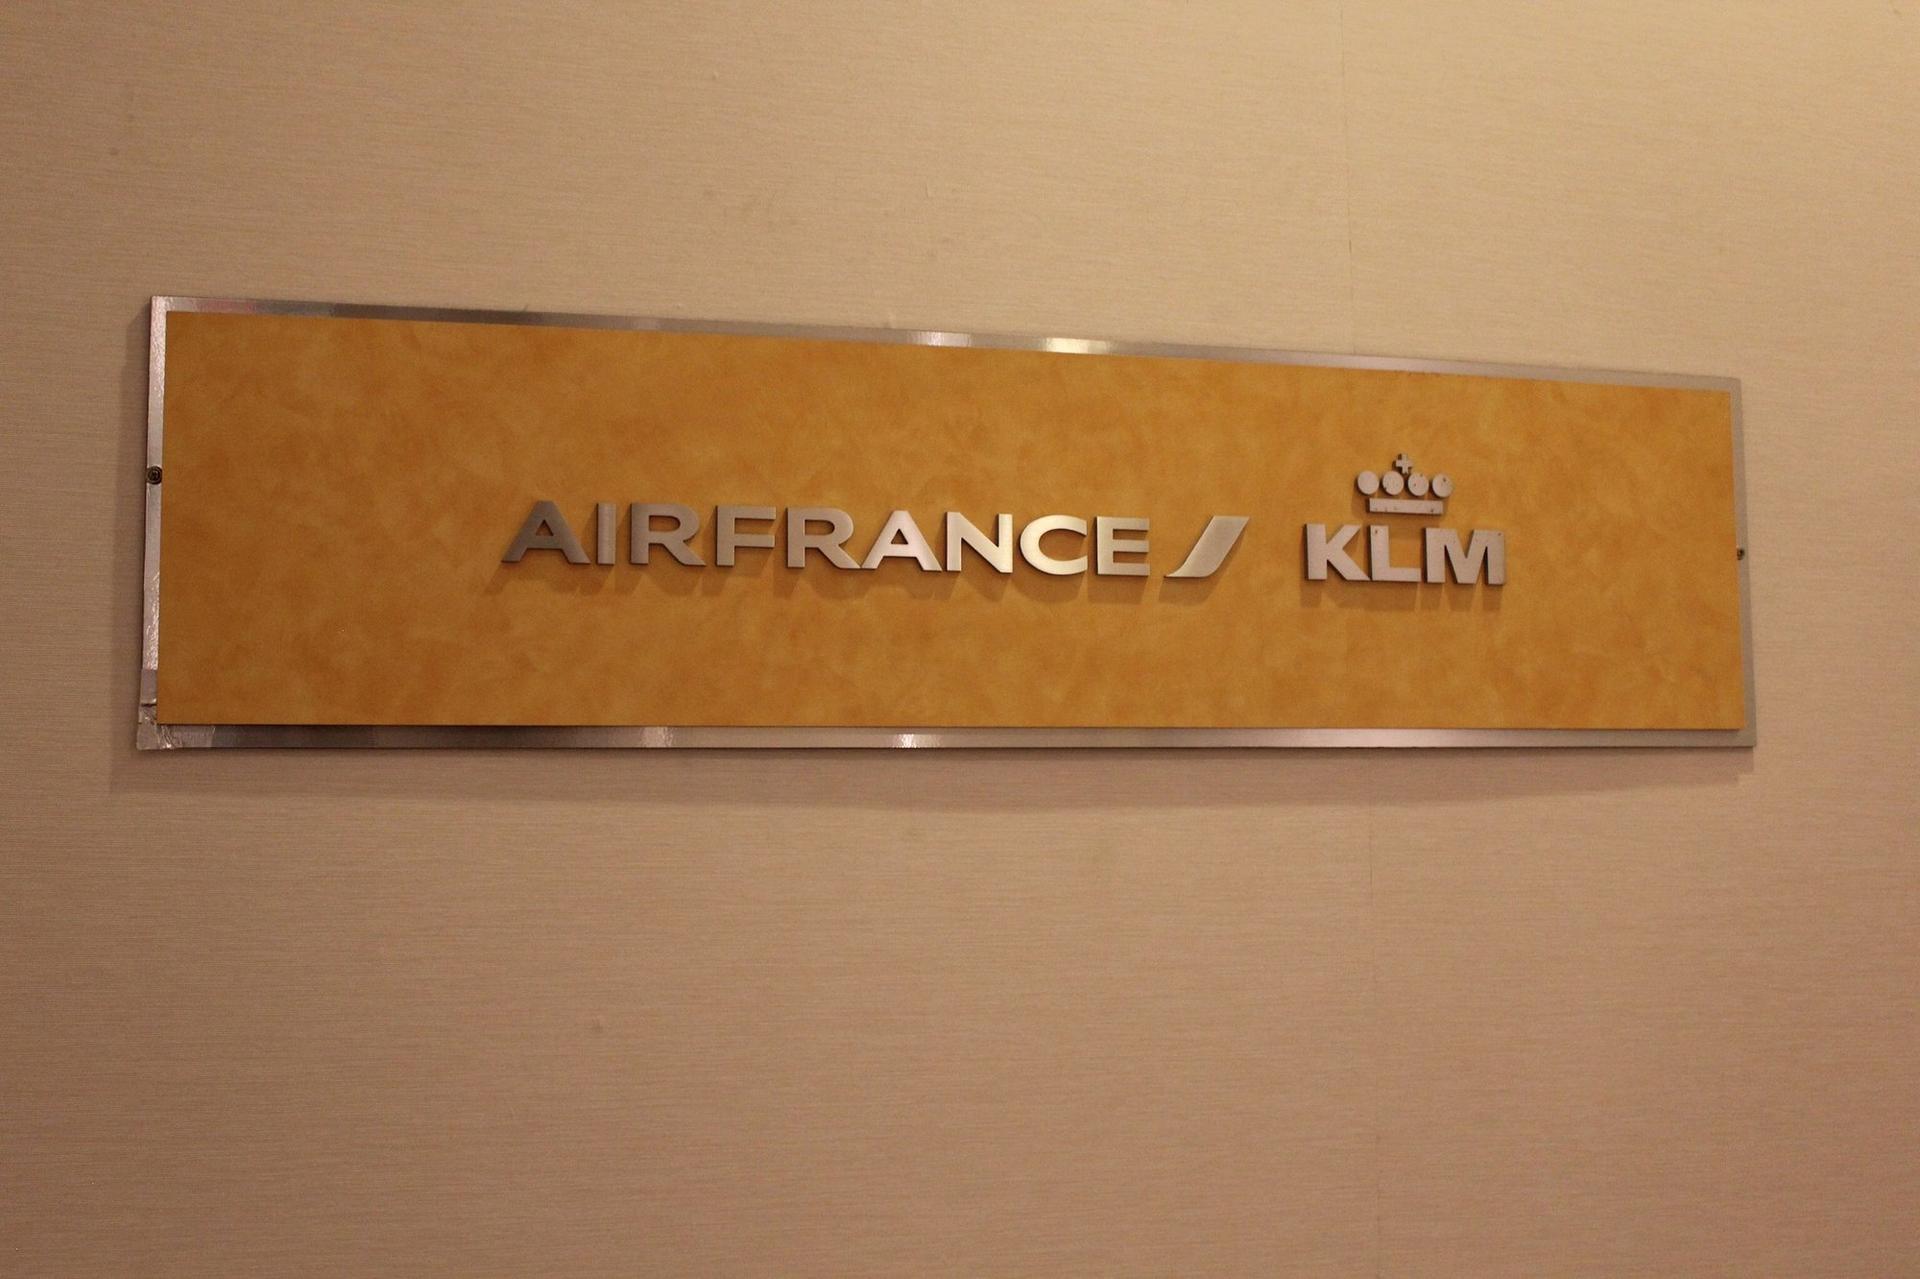 Air France Lounge image 5 of 26